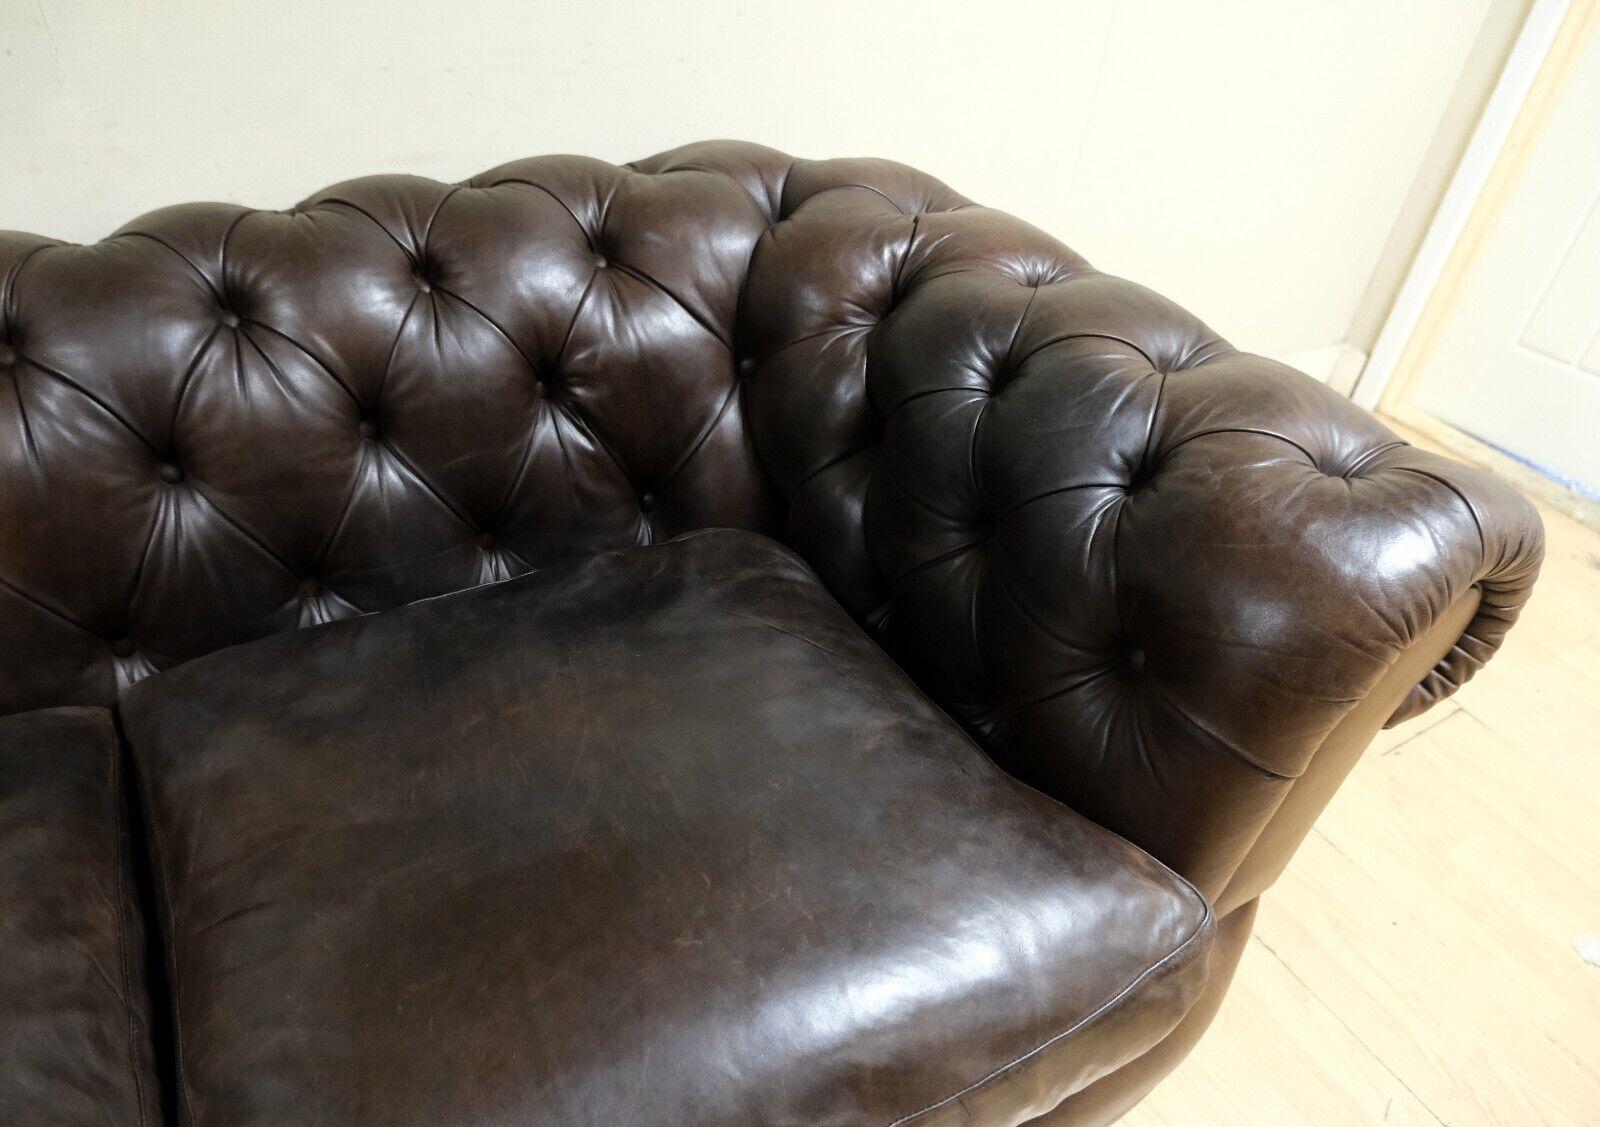 Choclate Brown Chesterfield Two Seater Leather Sofa Feather Filled Cushions 5